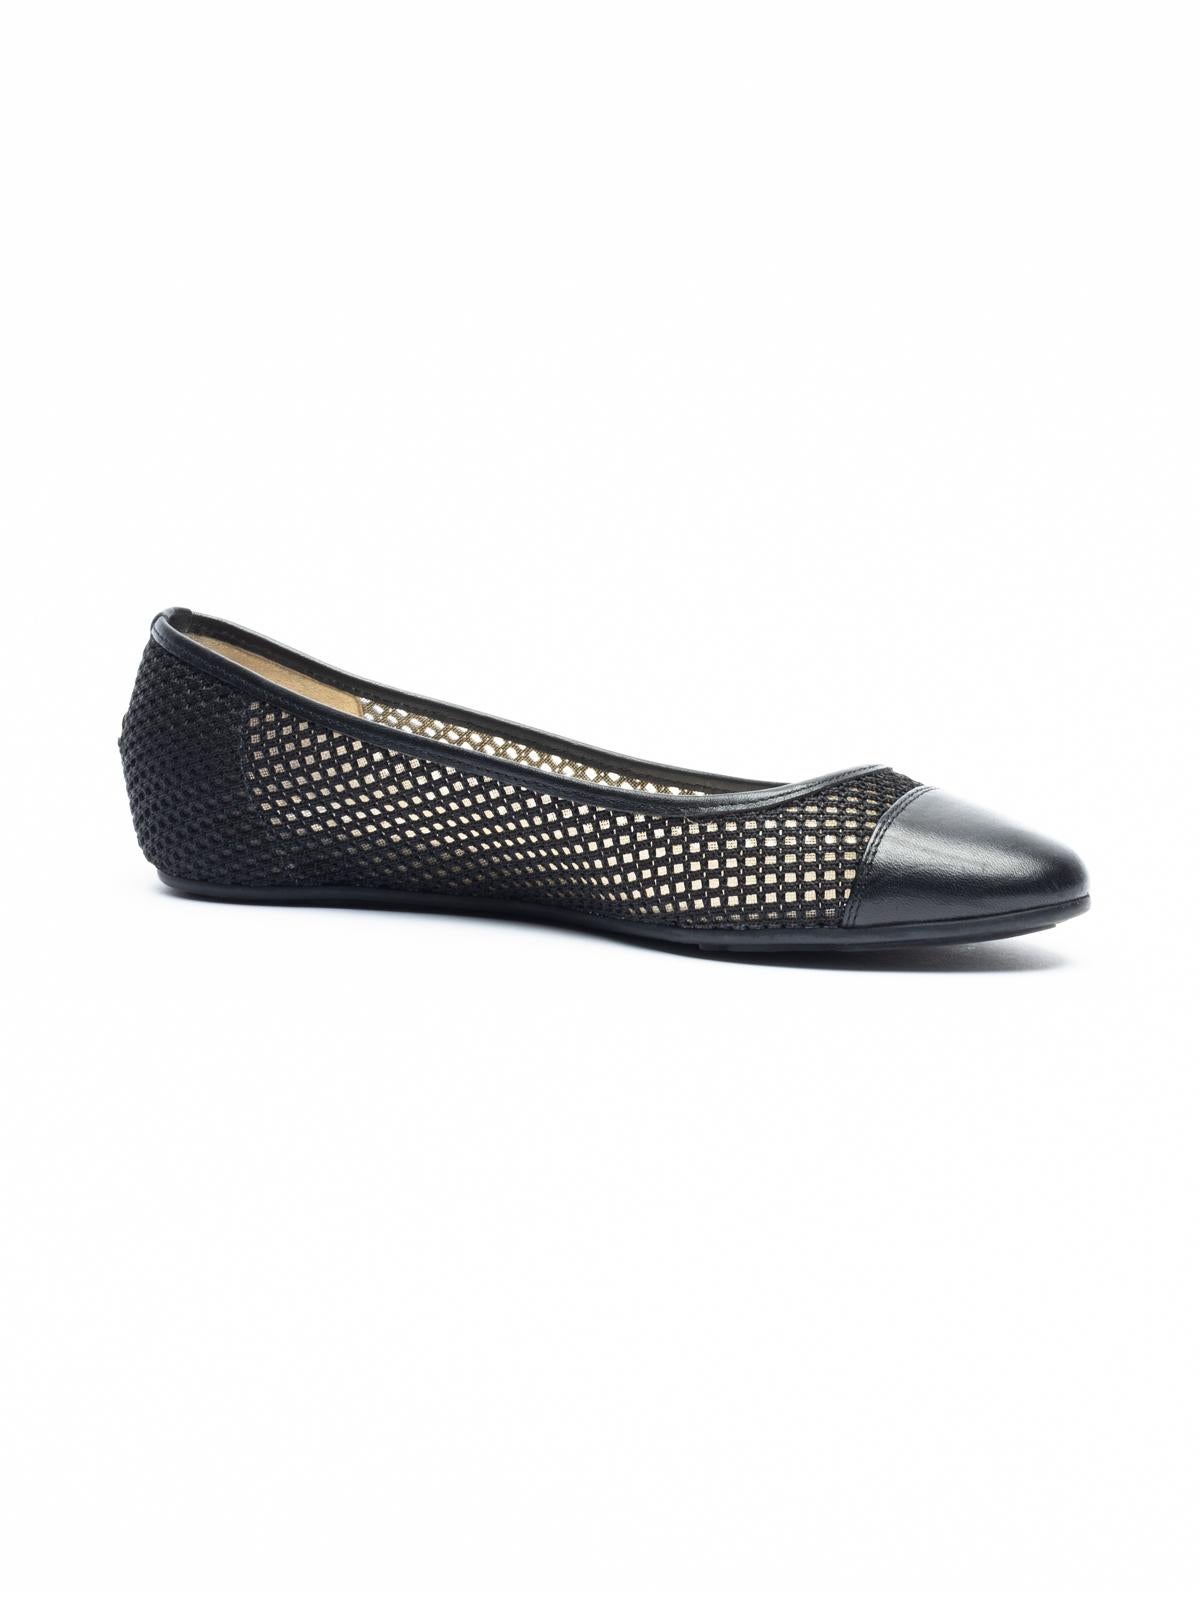 CONDITION is Very Good. Minor wear to areas such as the exterior and sole. Details Black Made In Italy Mesh Detailing Composition Leather Size 37 EU/ UK 4/ US 7 Pre-Loved Jimmy Choo Women's Black Leather and Mesh Ballerina Pumps